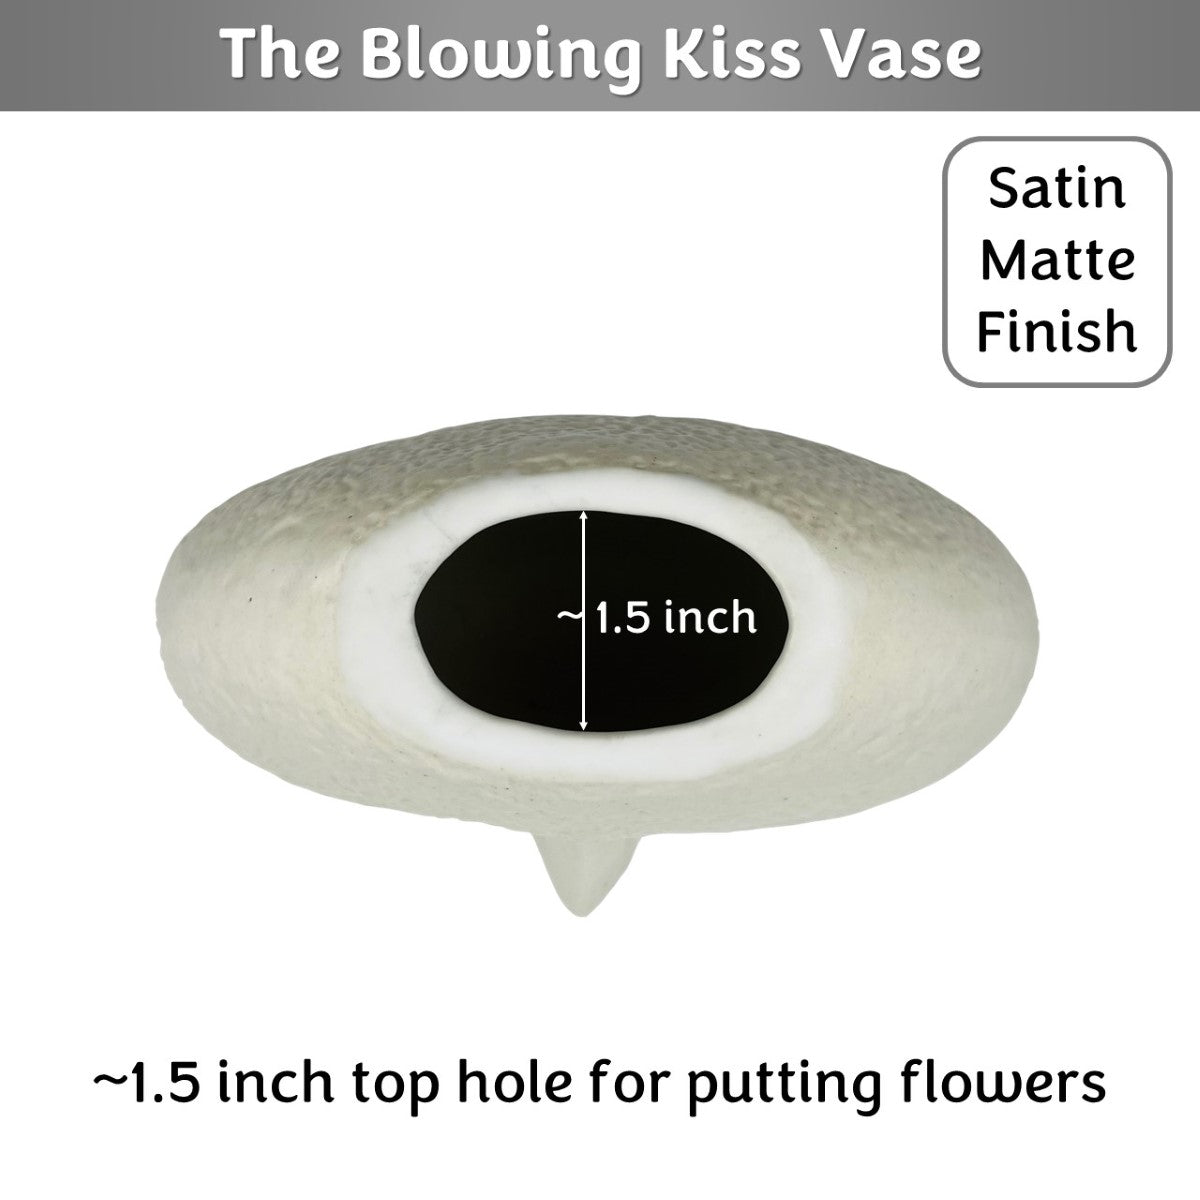 The Blowing Kiss Face Vase